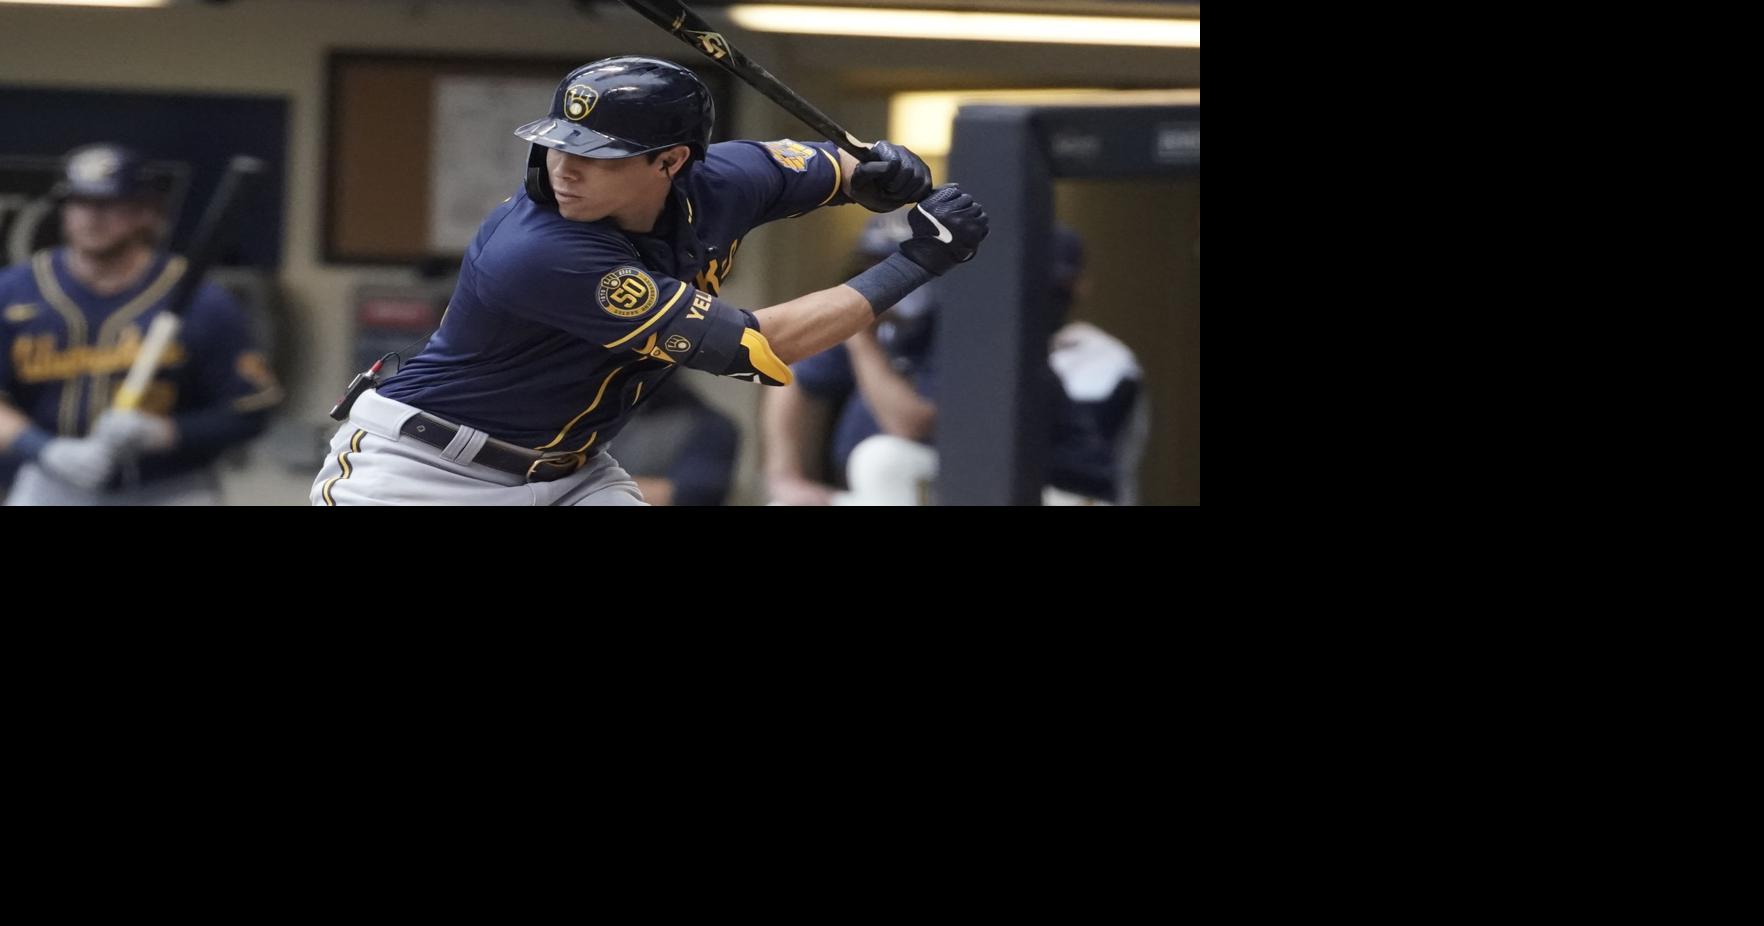 Christian Yelich's clothes are going, going, gone for ESPN